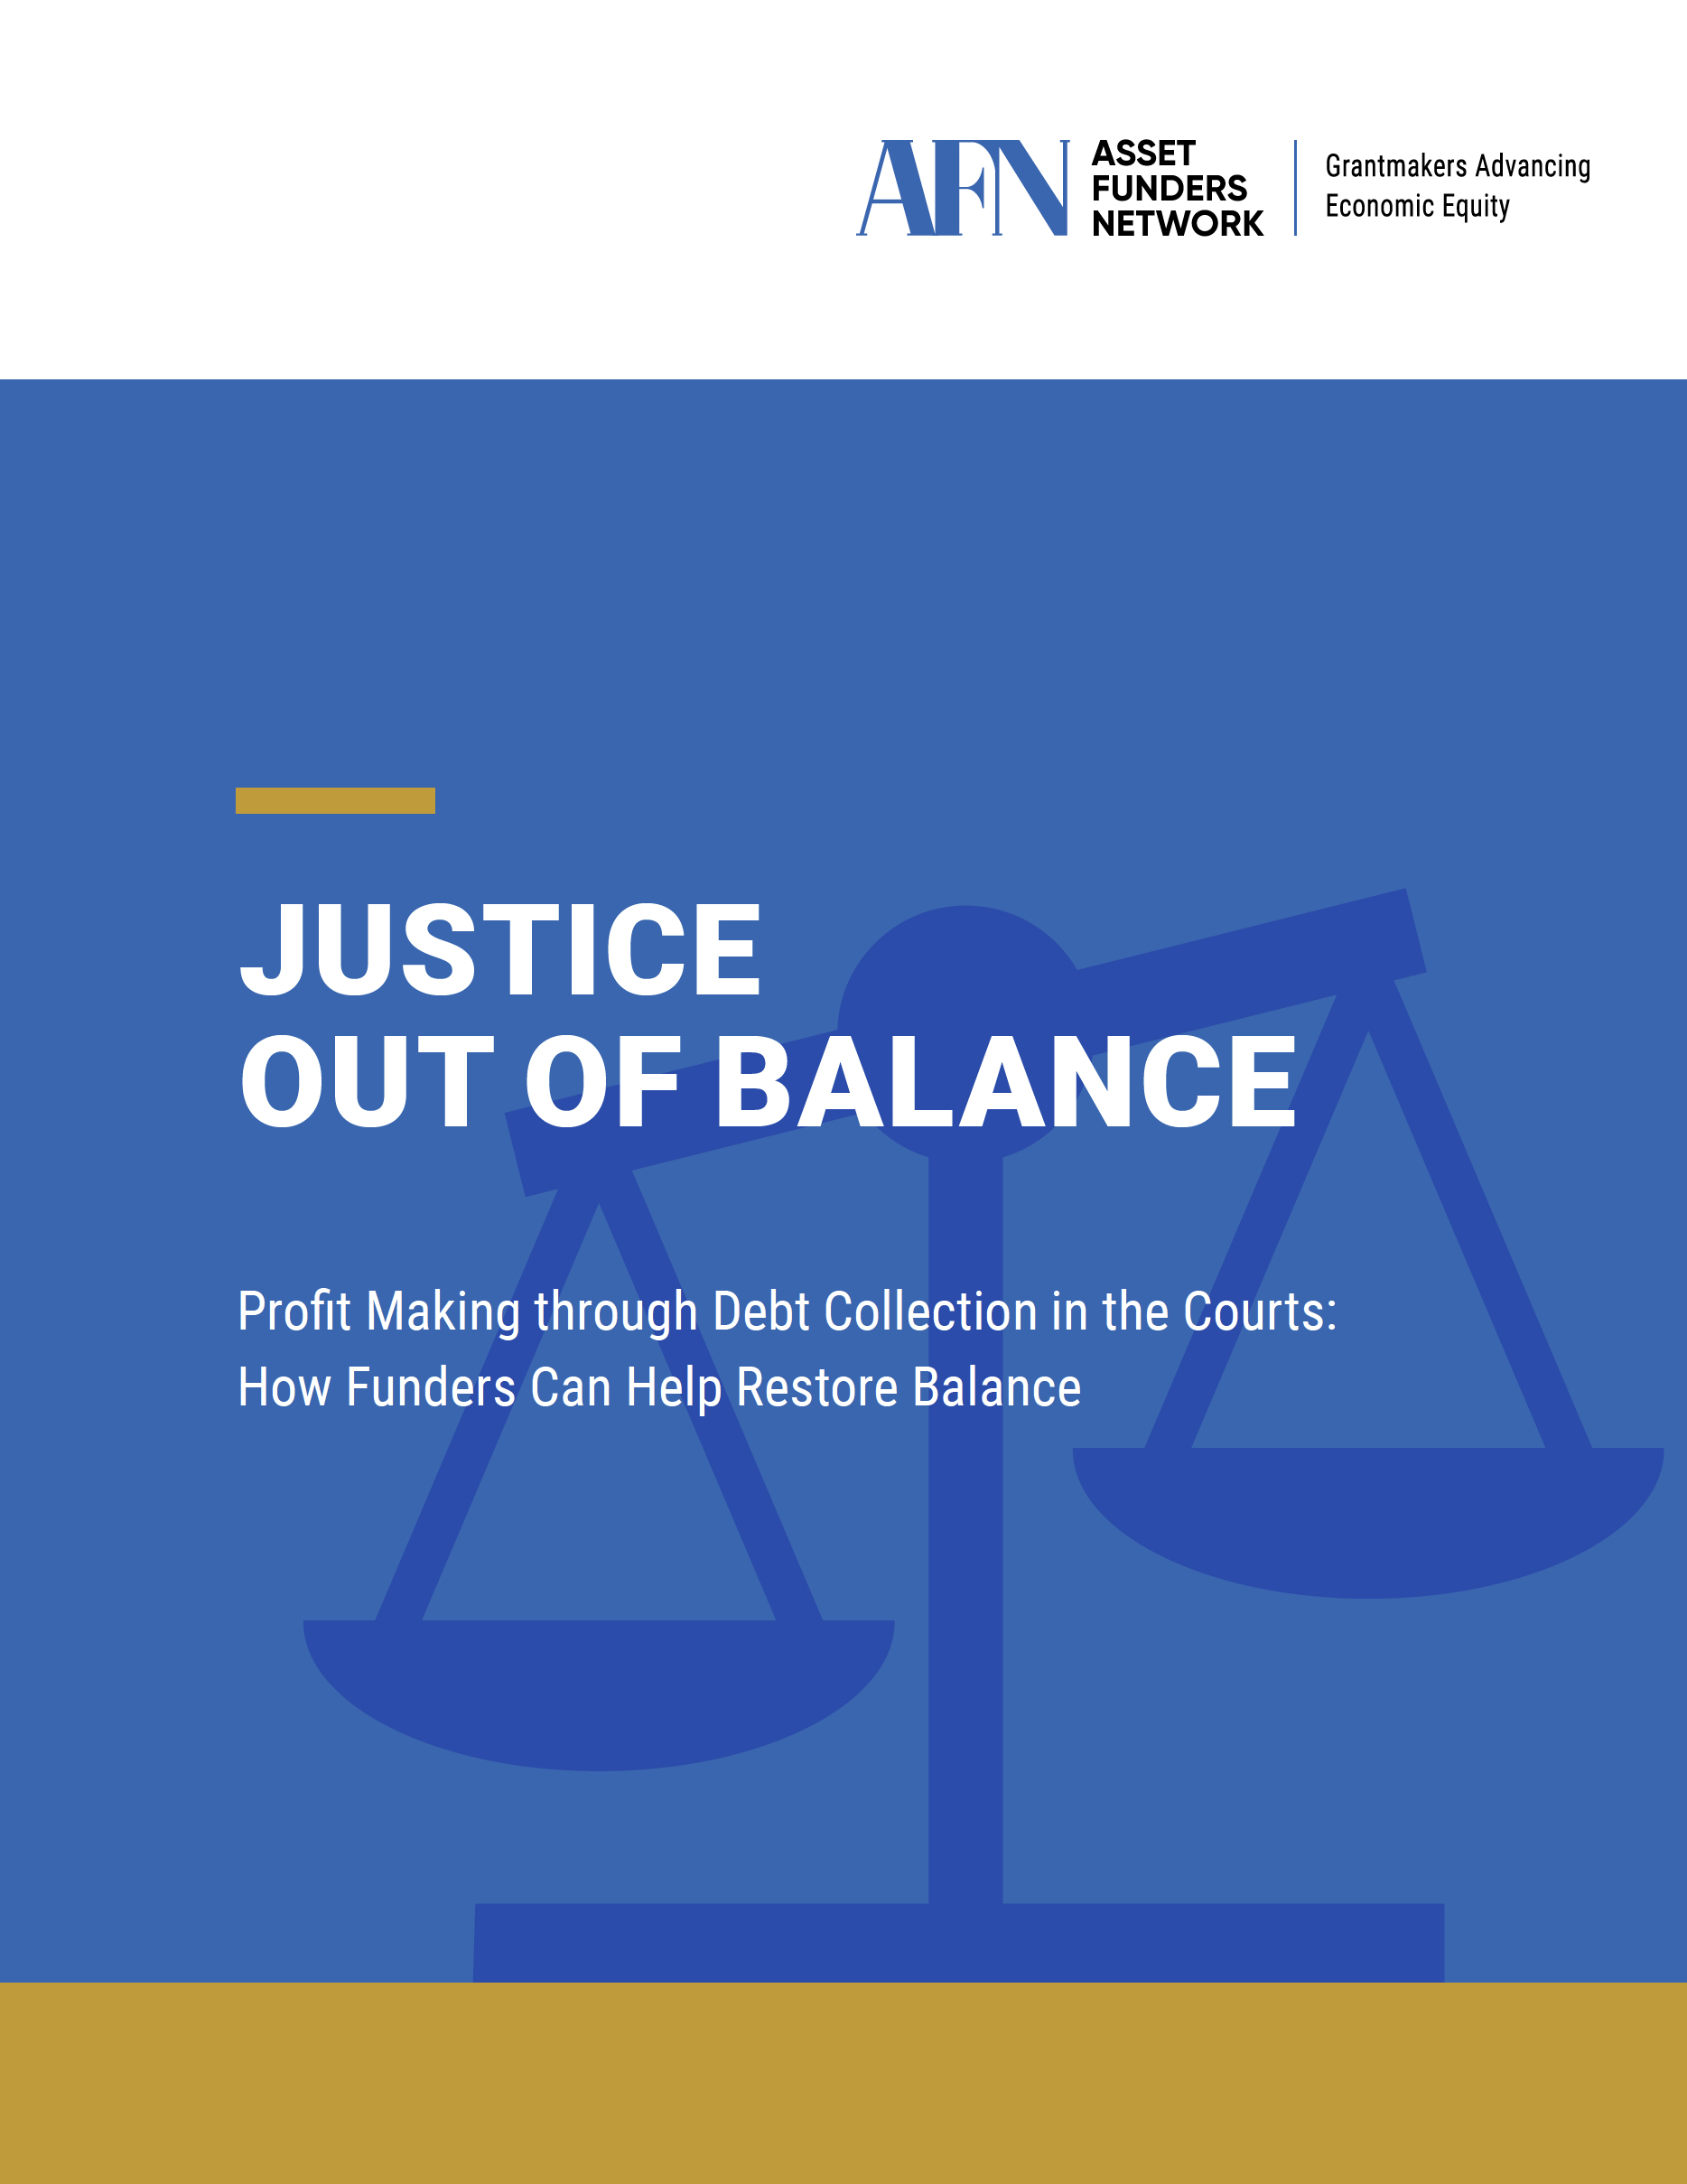 Justice Out Of Balance Brief Cover Image